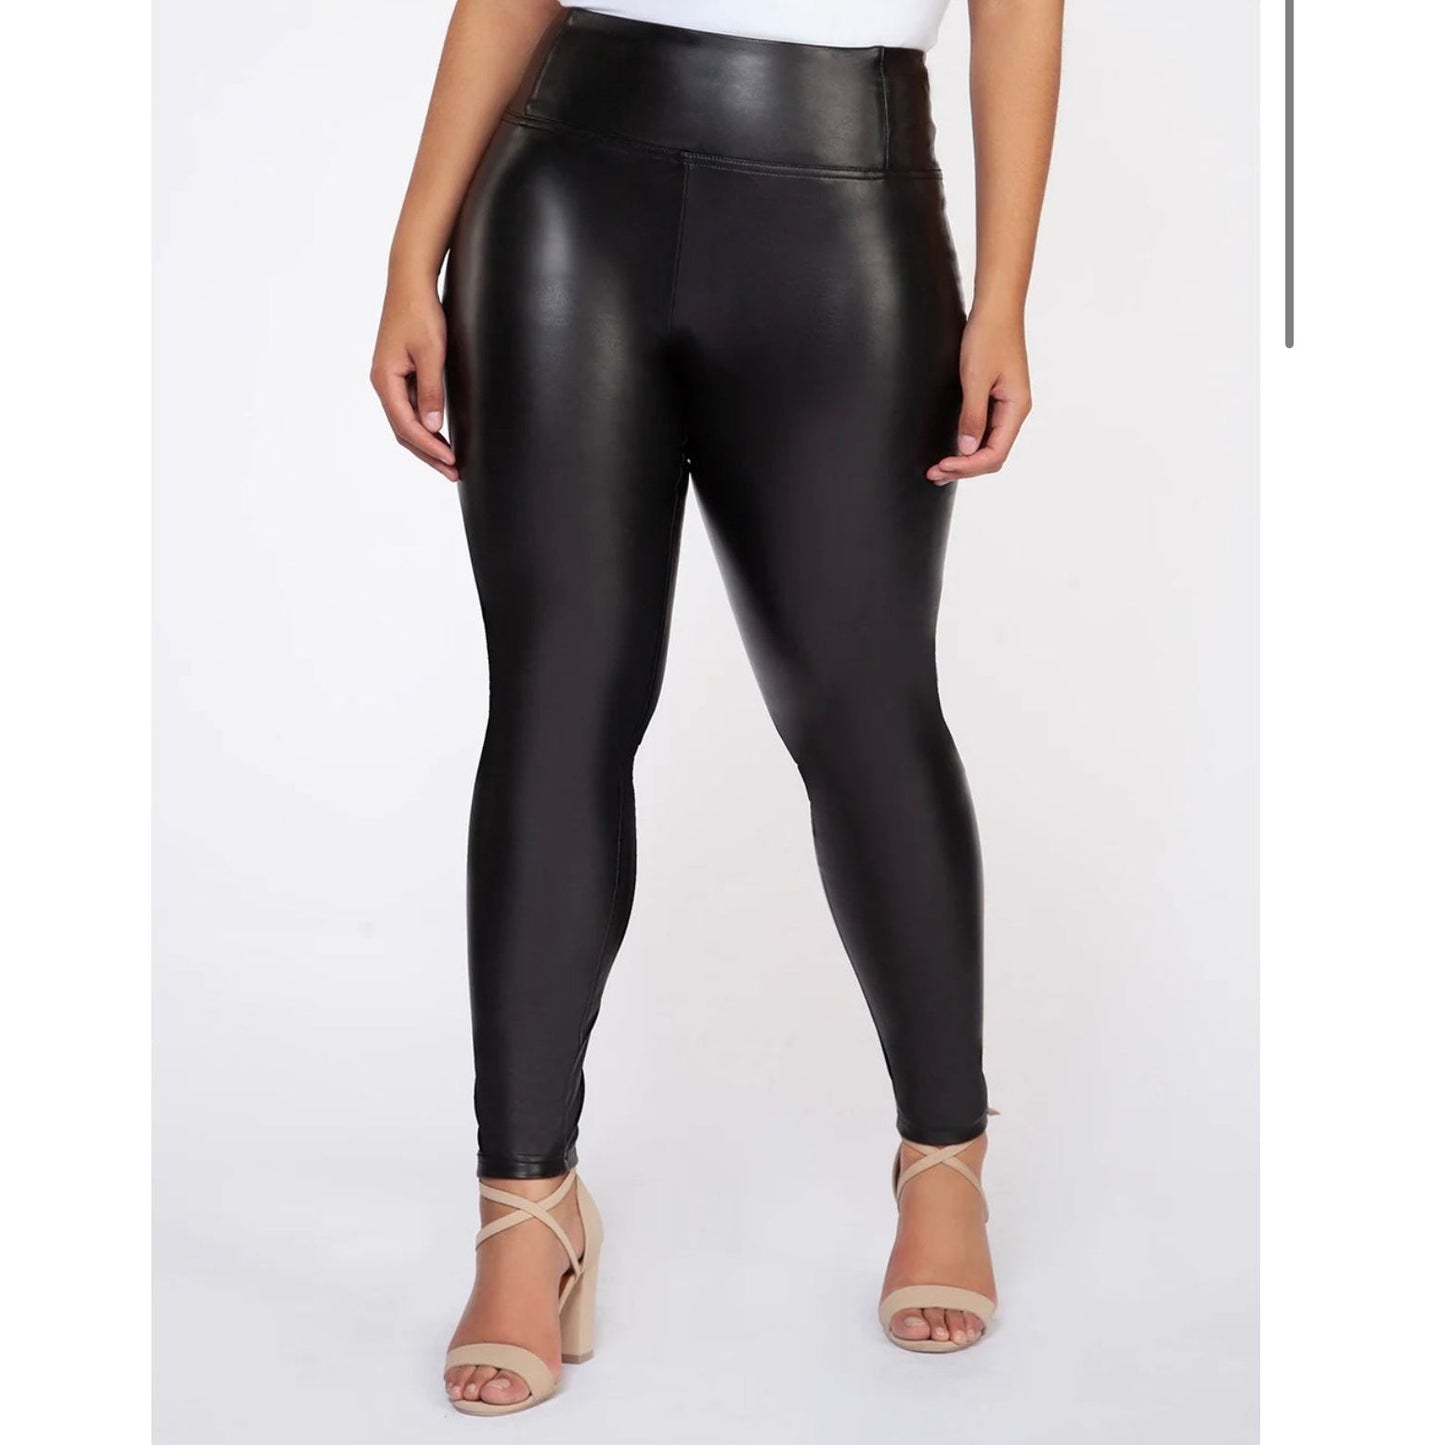 Act Up Faux Leather Leggings "Black"